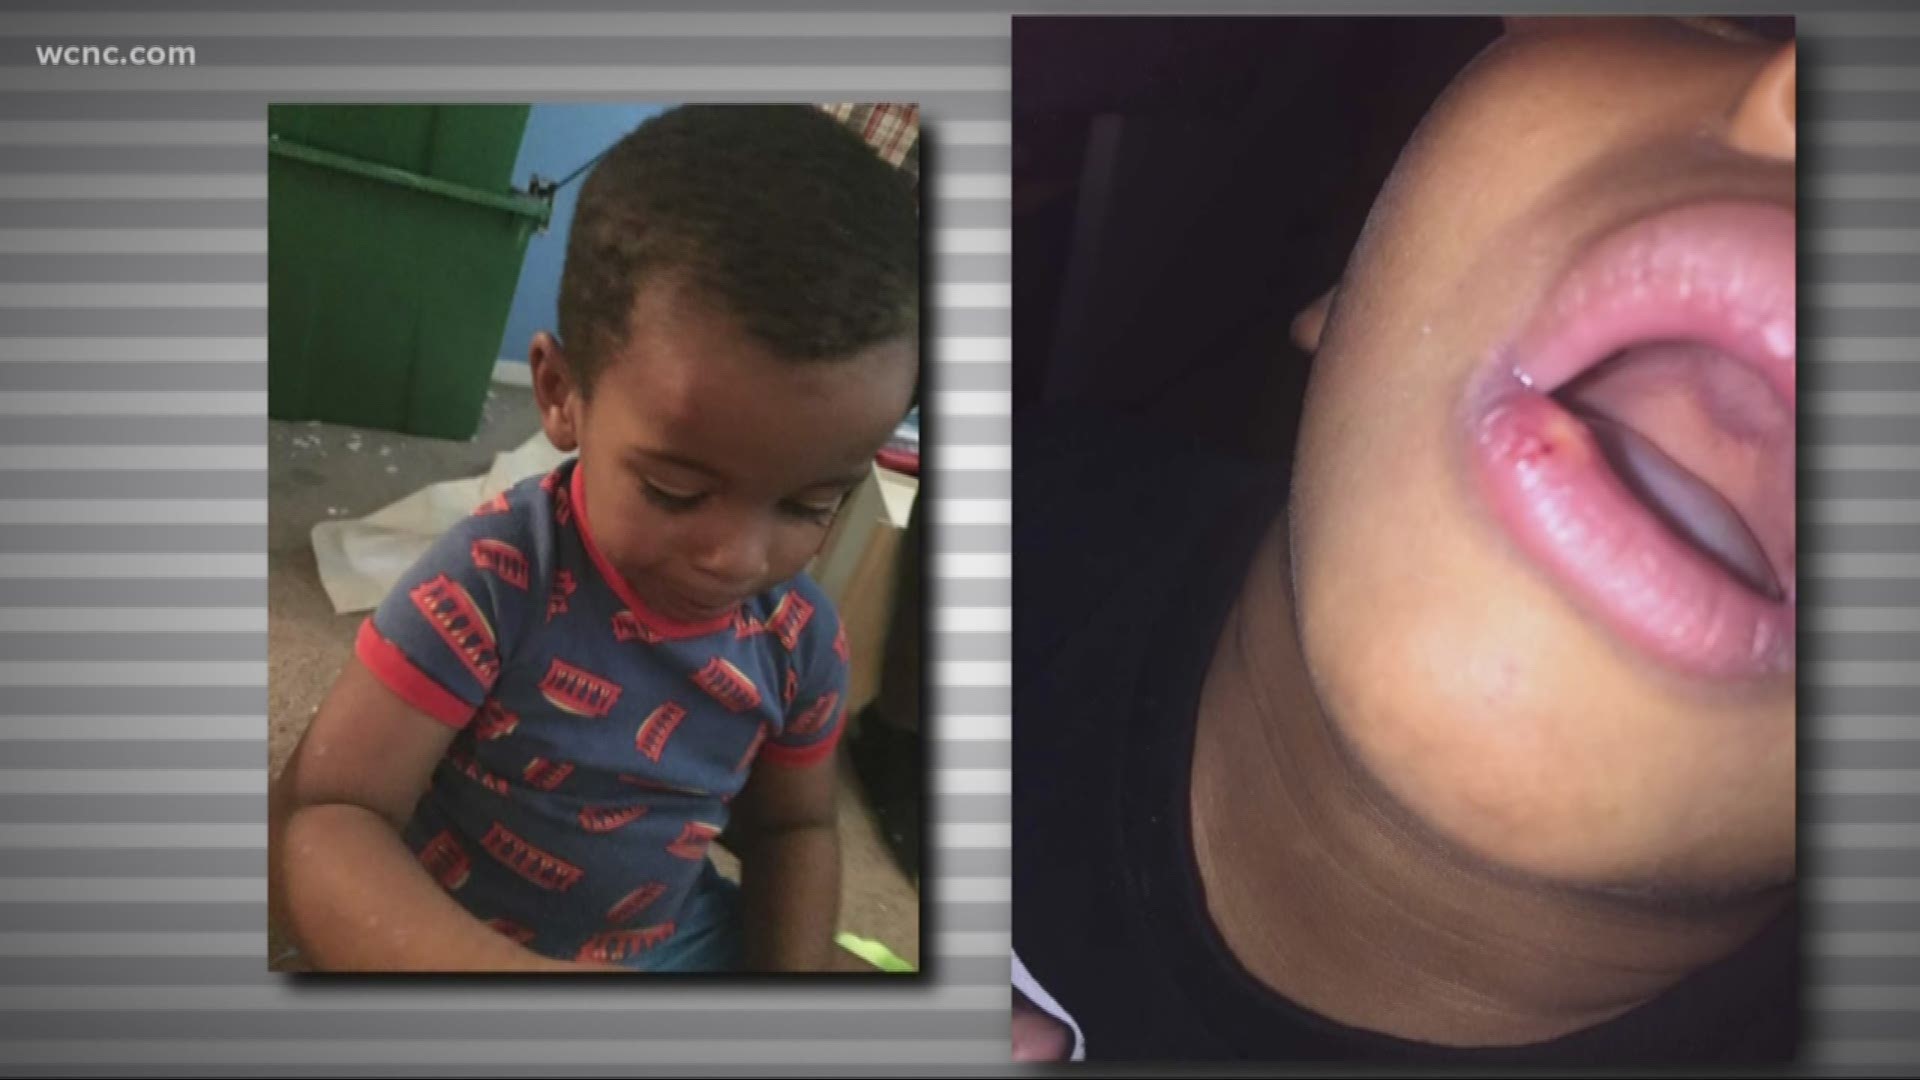 That mother claims someone working inside the school harmed her 4-year-old. Charlotte-Mecklenburg Police are investigating the incident.